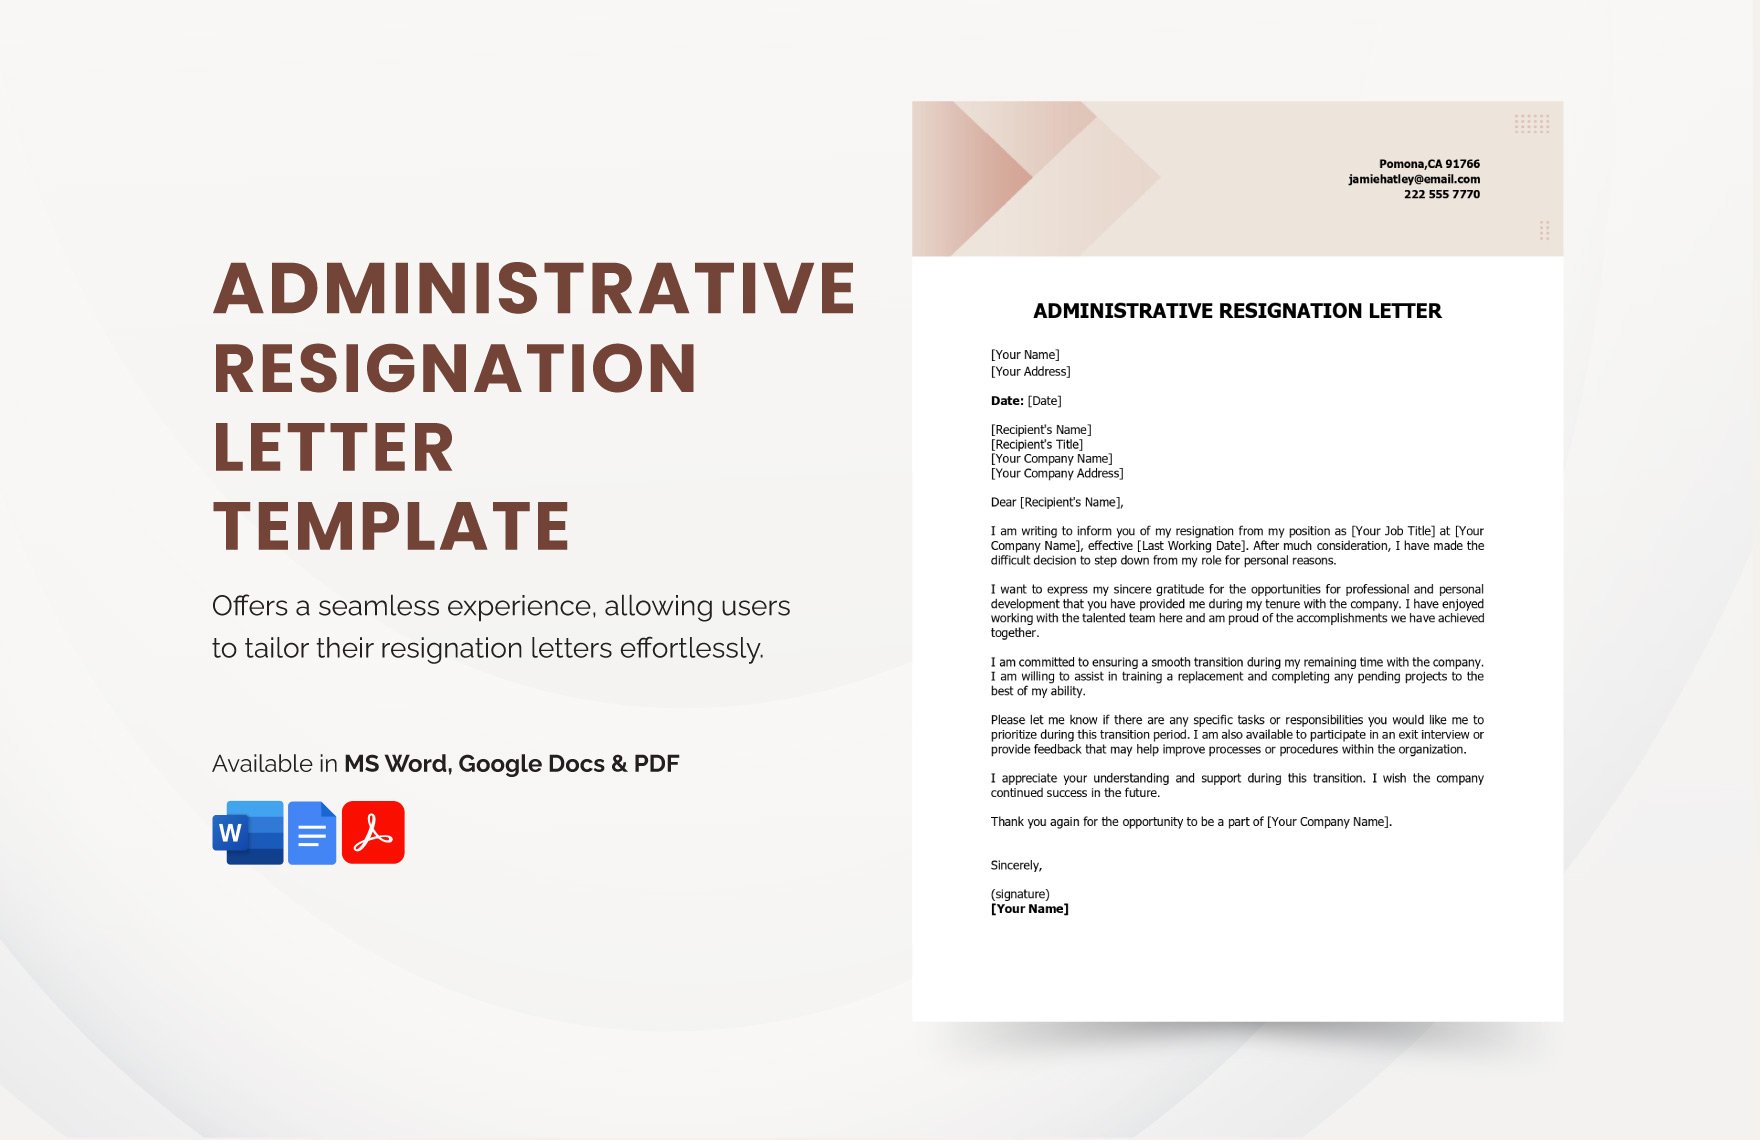 Administrative Resignation Letter Template in Word, Google Docs, PDF